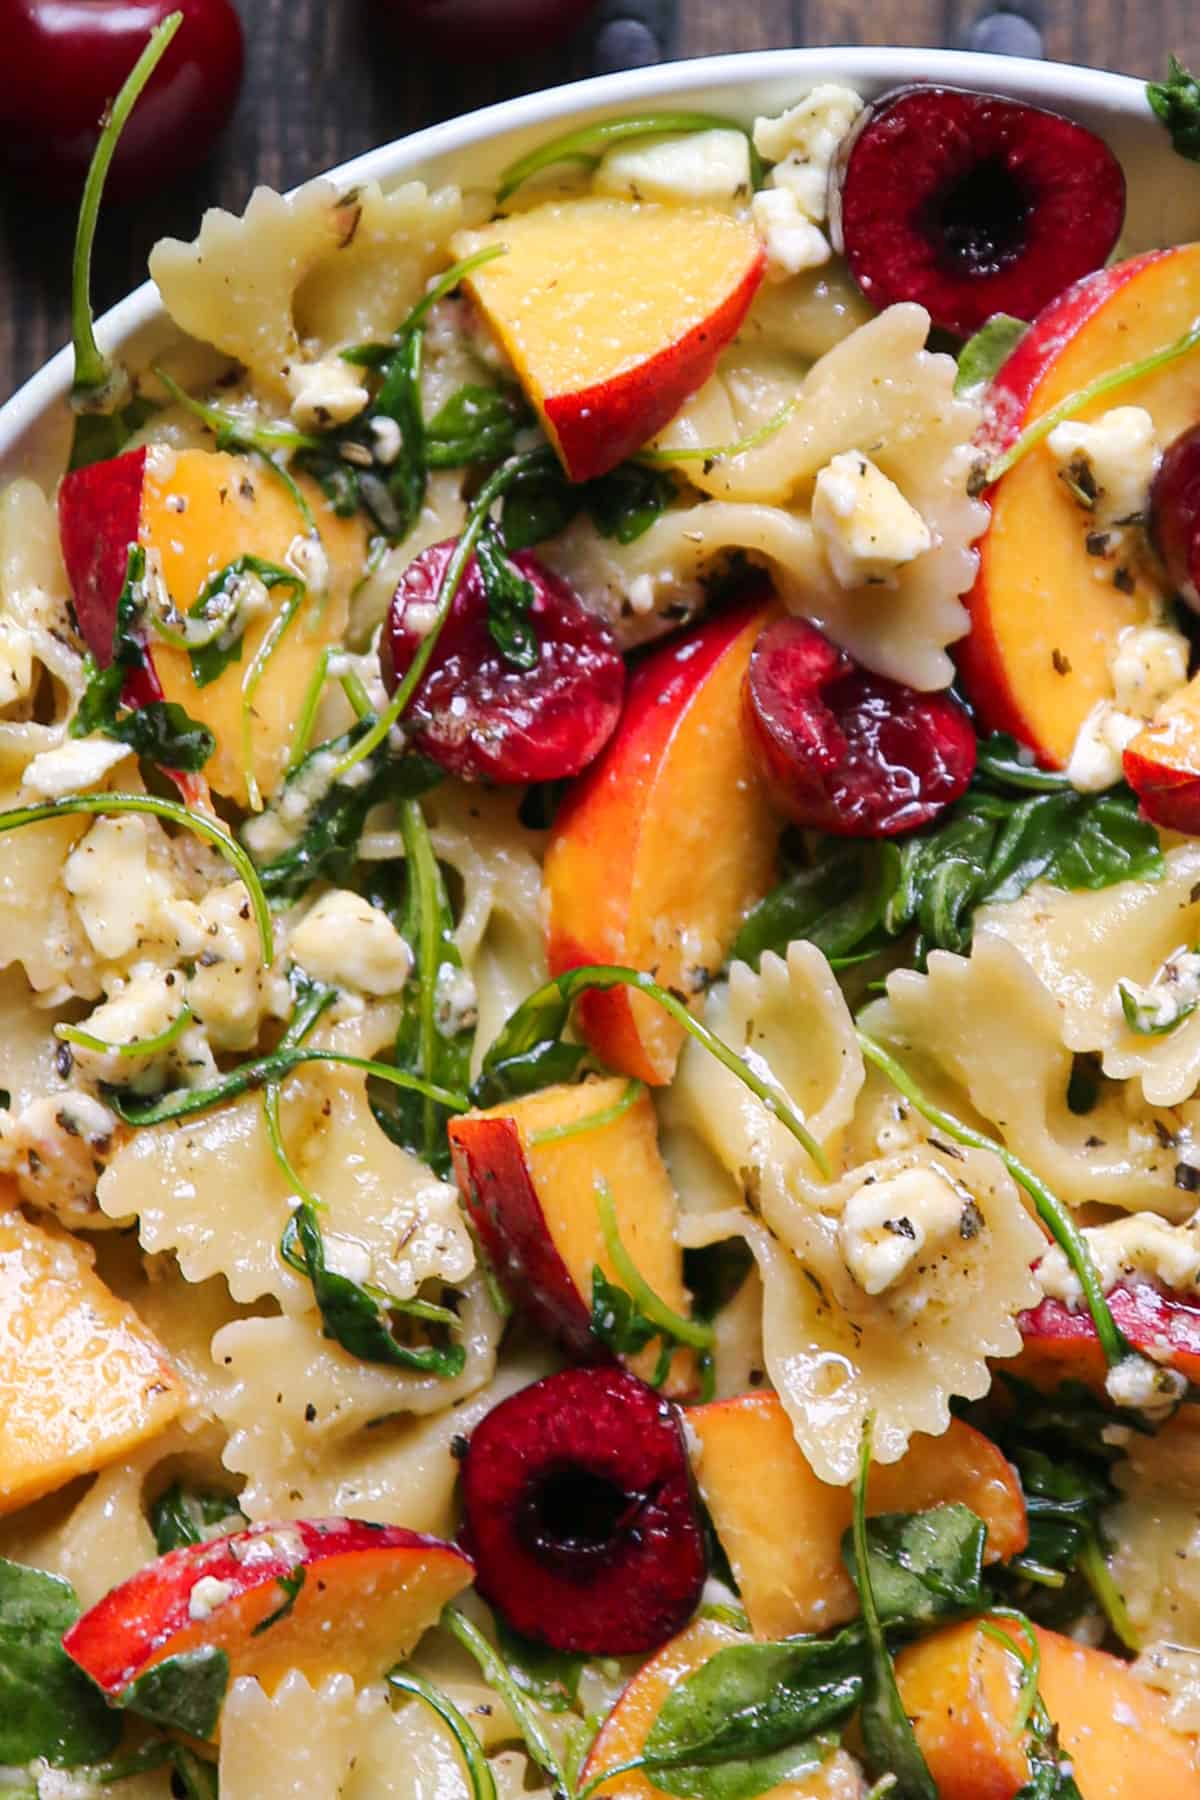 Stone Fruit Salad with Cherries, Peaches, Bow-Tie Pasta, Feta, and Arugula - in a white bowl.